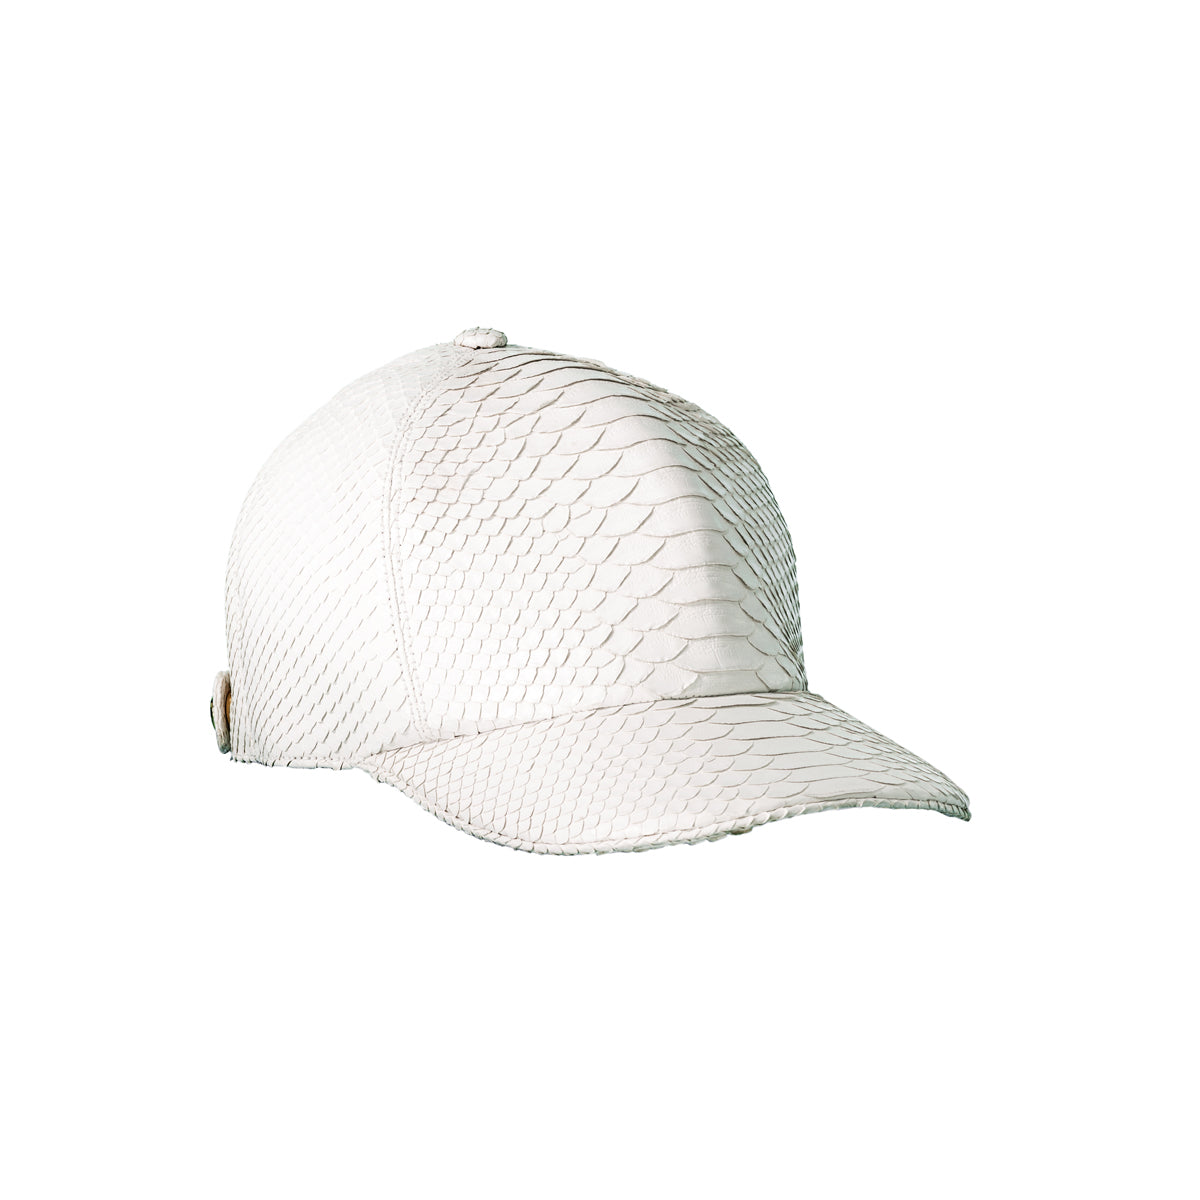 STALVEY The Big Deep Baseball Hat in White Python Front View